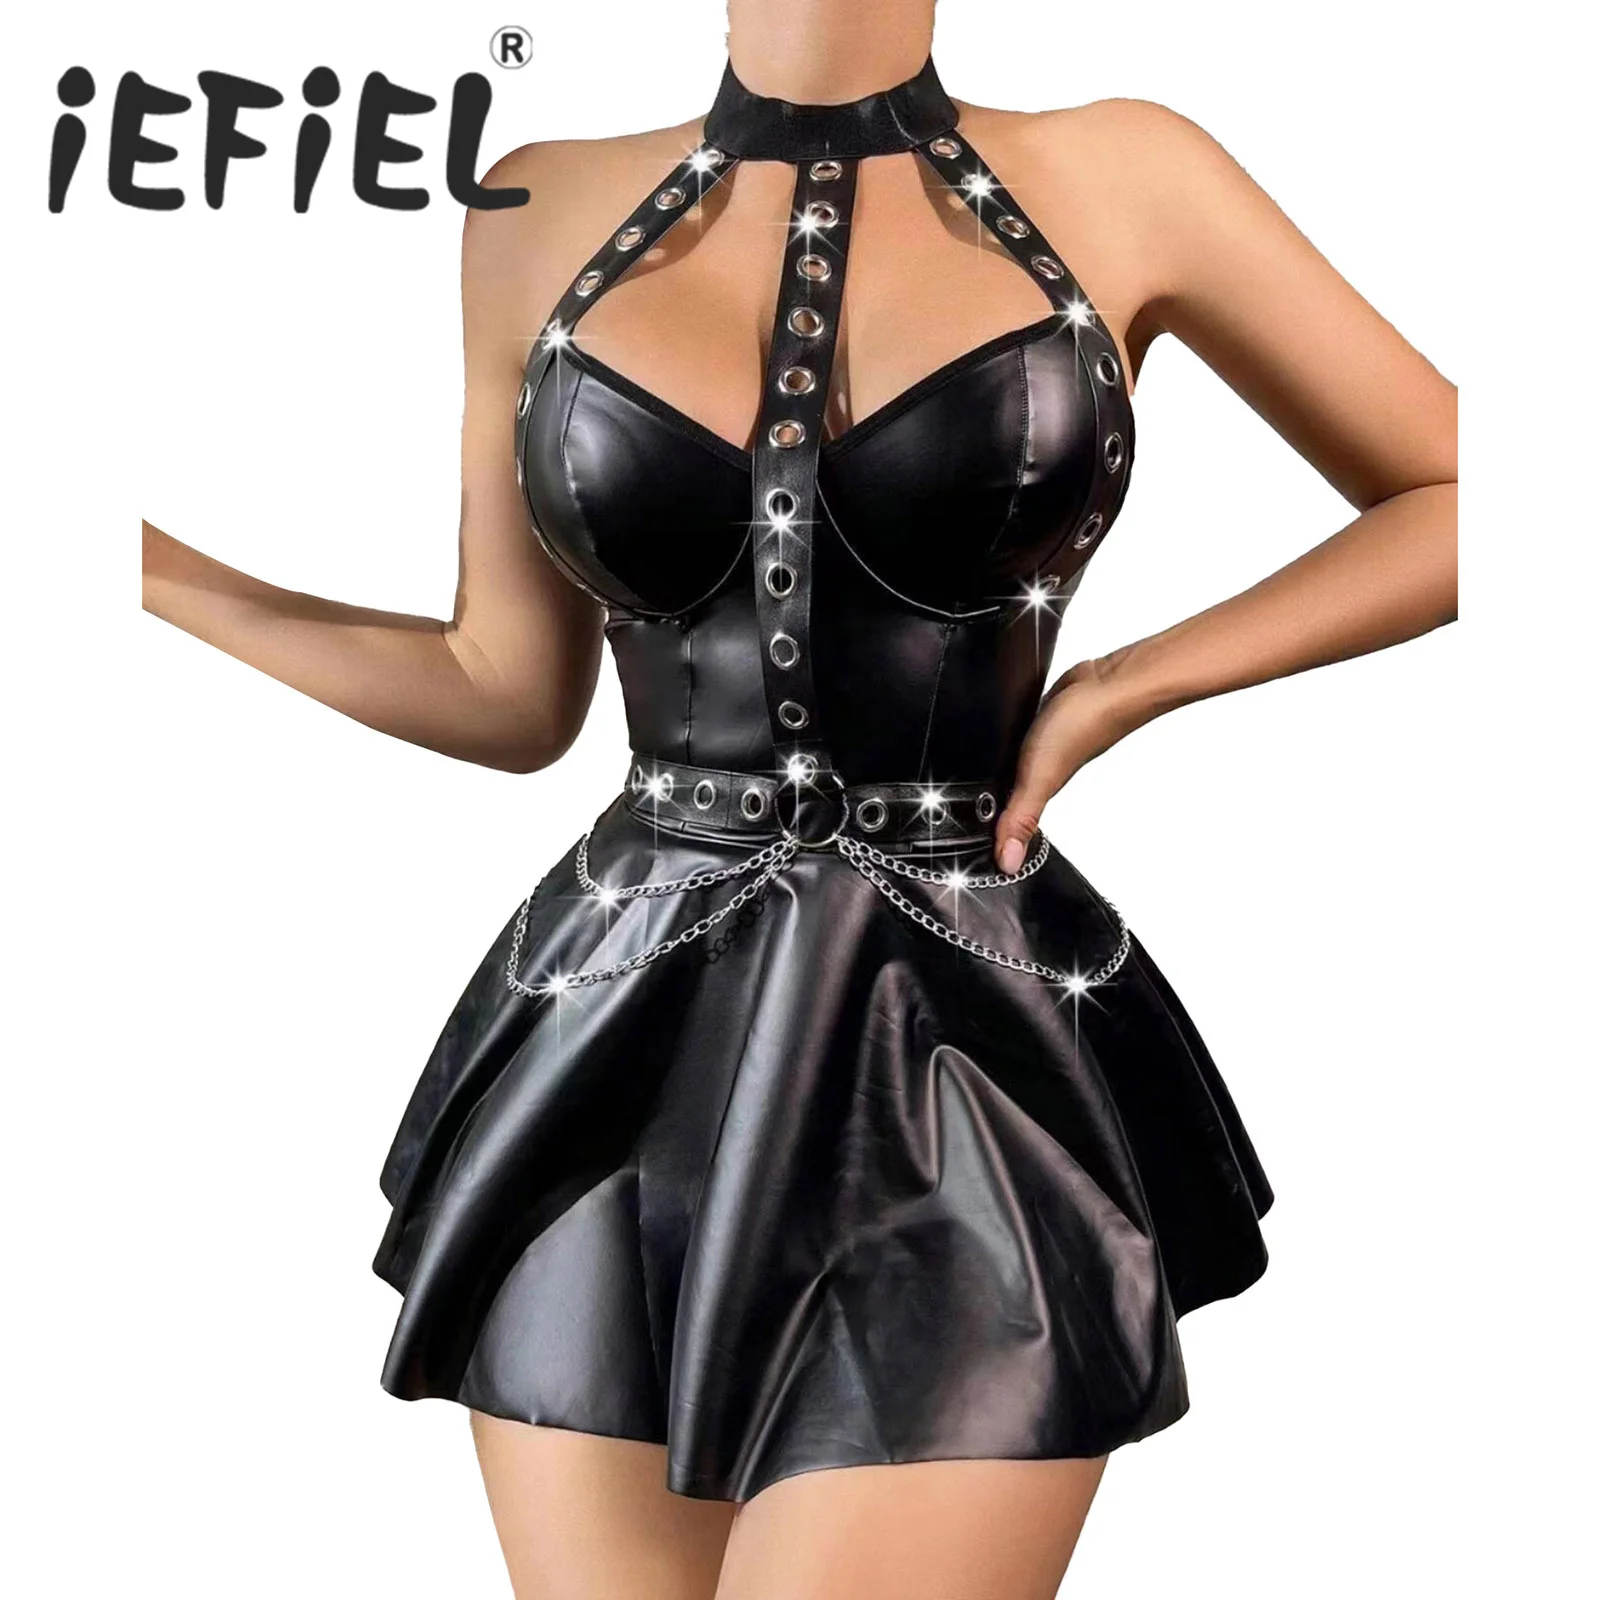 

Womens Punk Costume PU Leather Dress with T-Back Briefs Halter Sleeveless Eyelet Straps Chain A-Line Mini Dress for Club Street